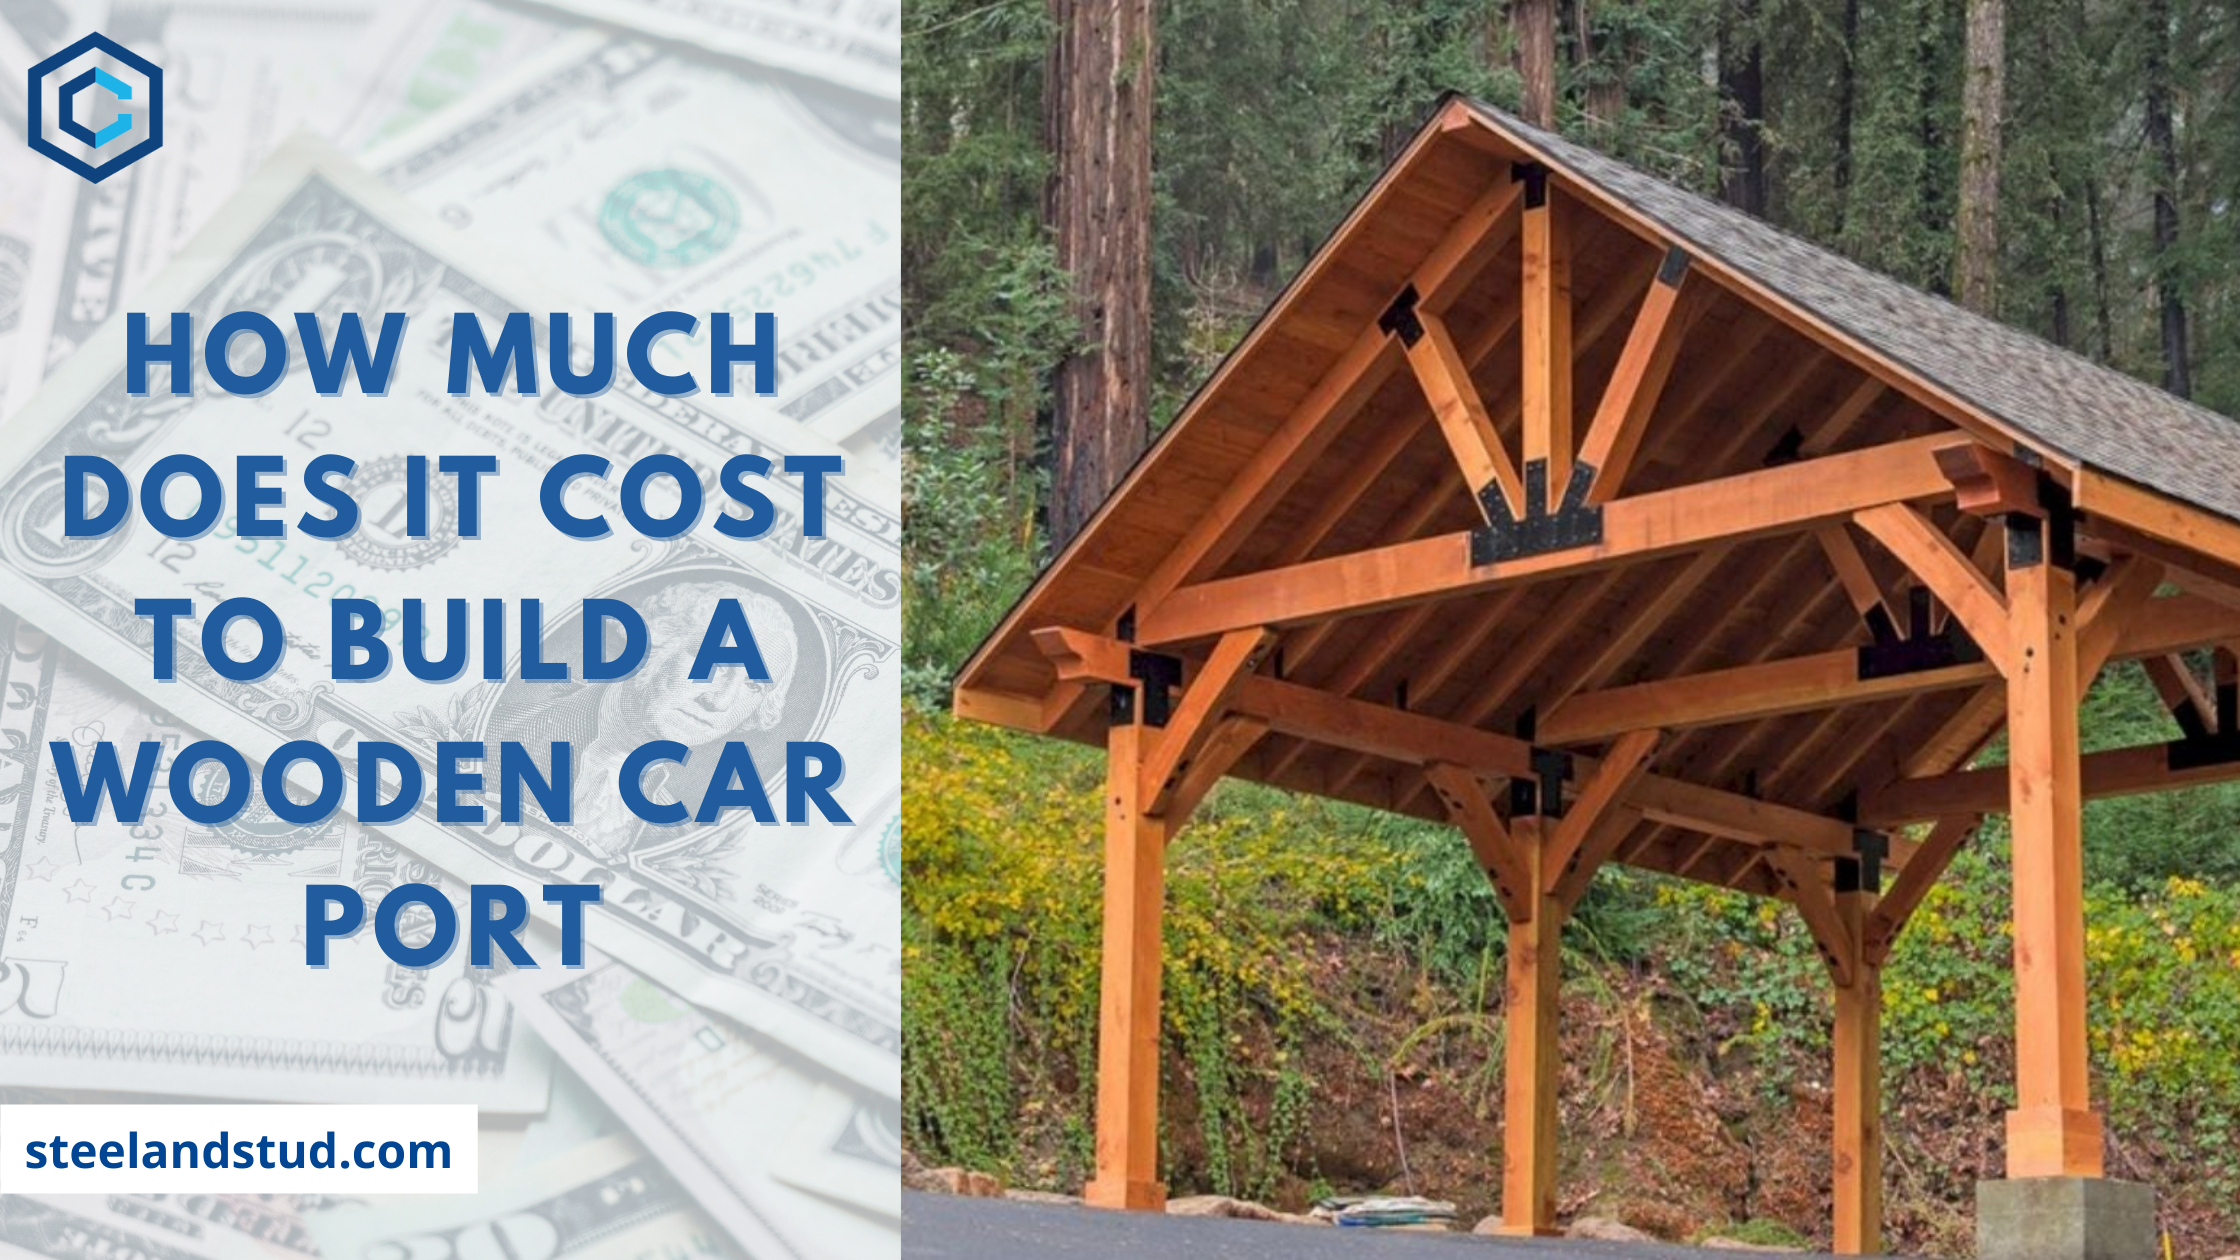 How Much Does It Cost to Build a Wooden Car port?